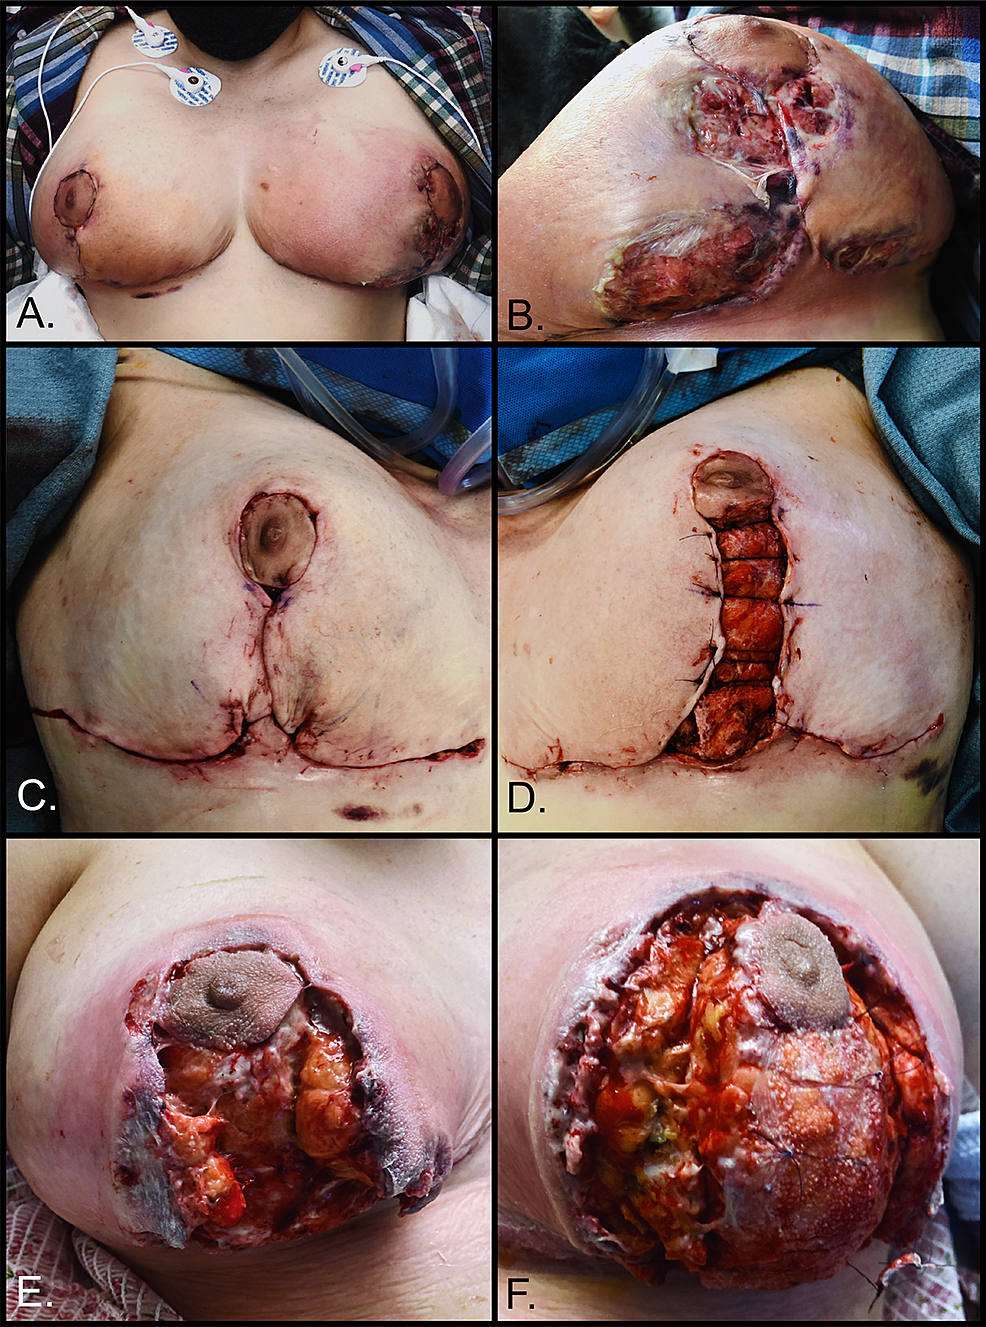 PDF) Necrotizing Cutaneous Fungal Infection of the Breast in a